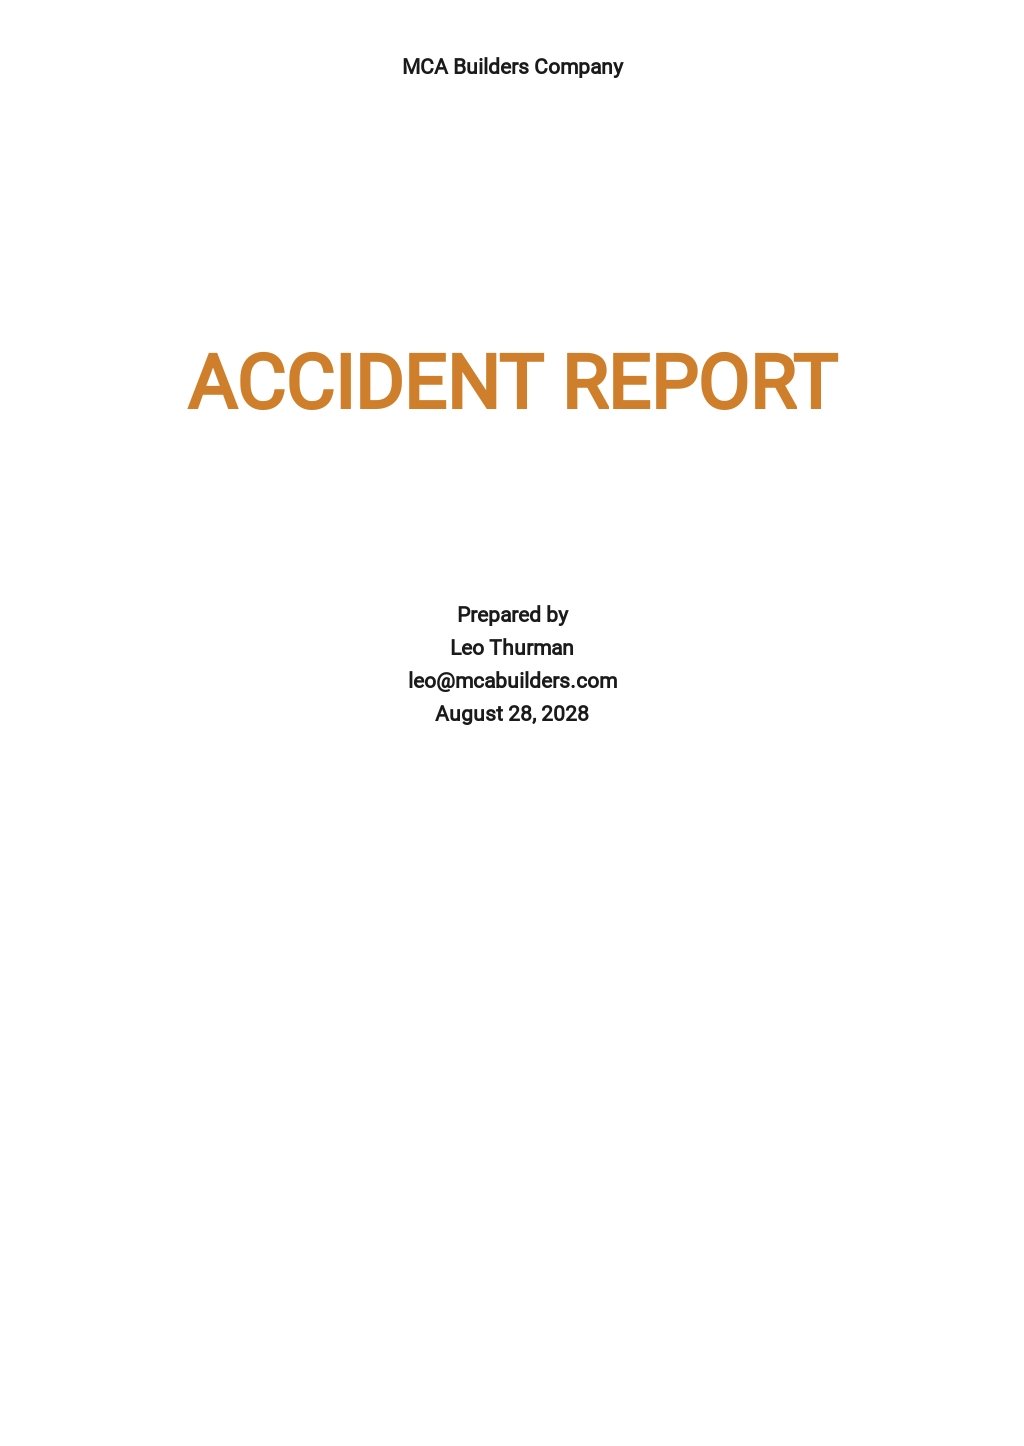 Sample Accident Report Template.jpe